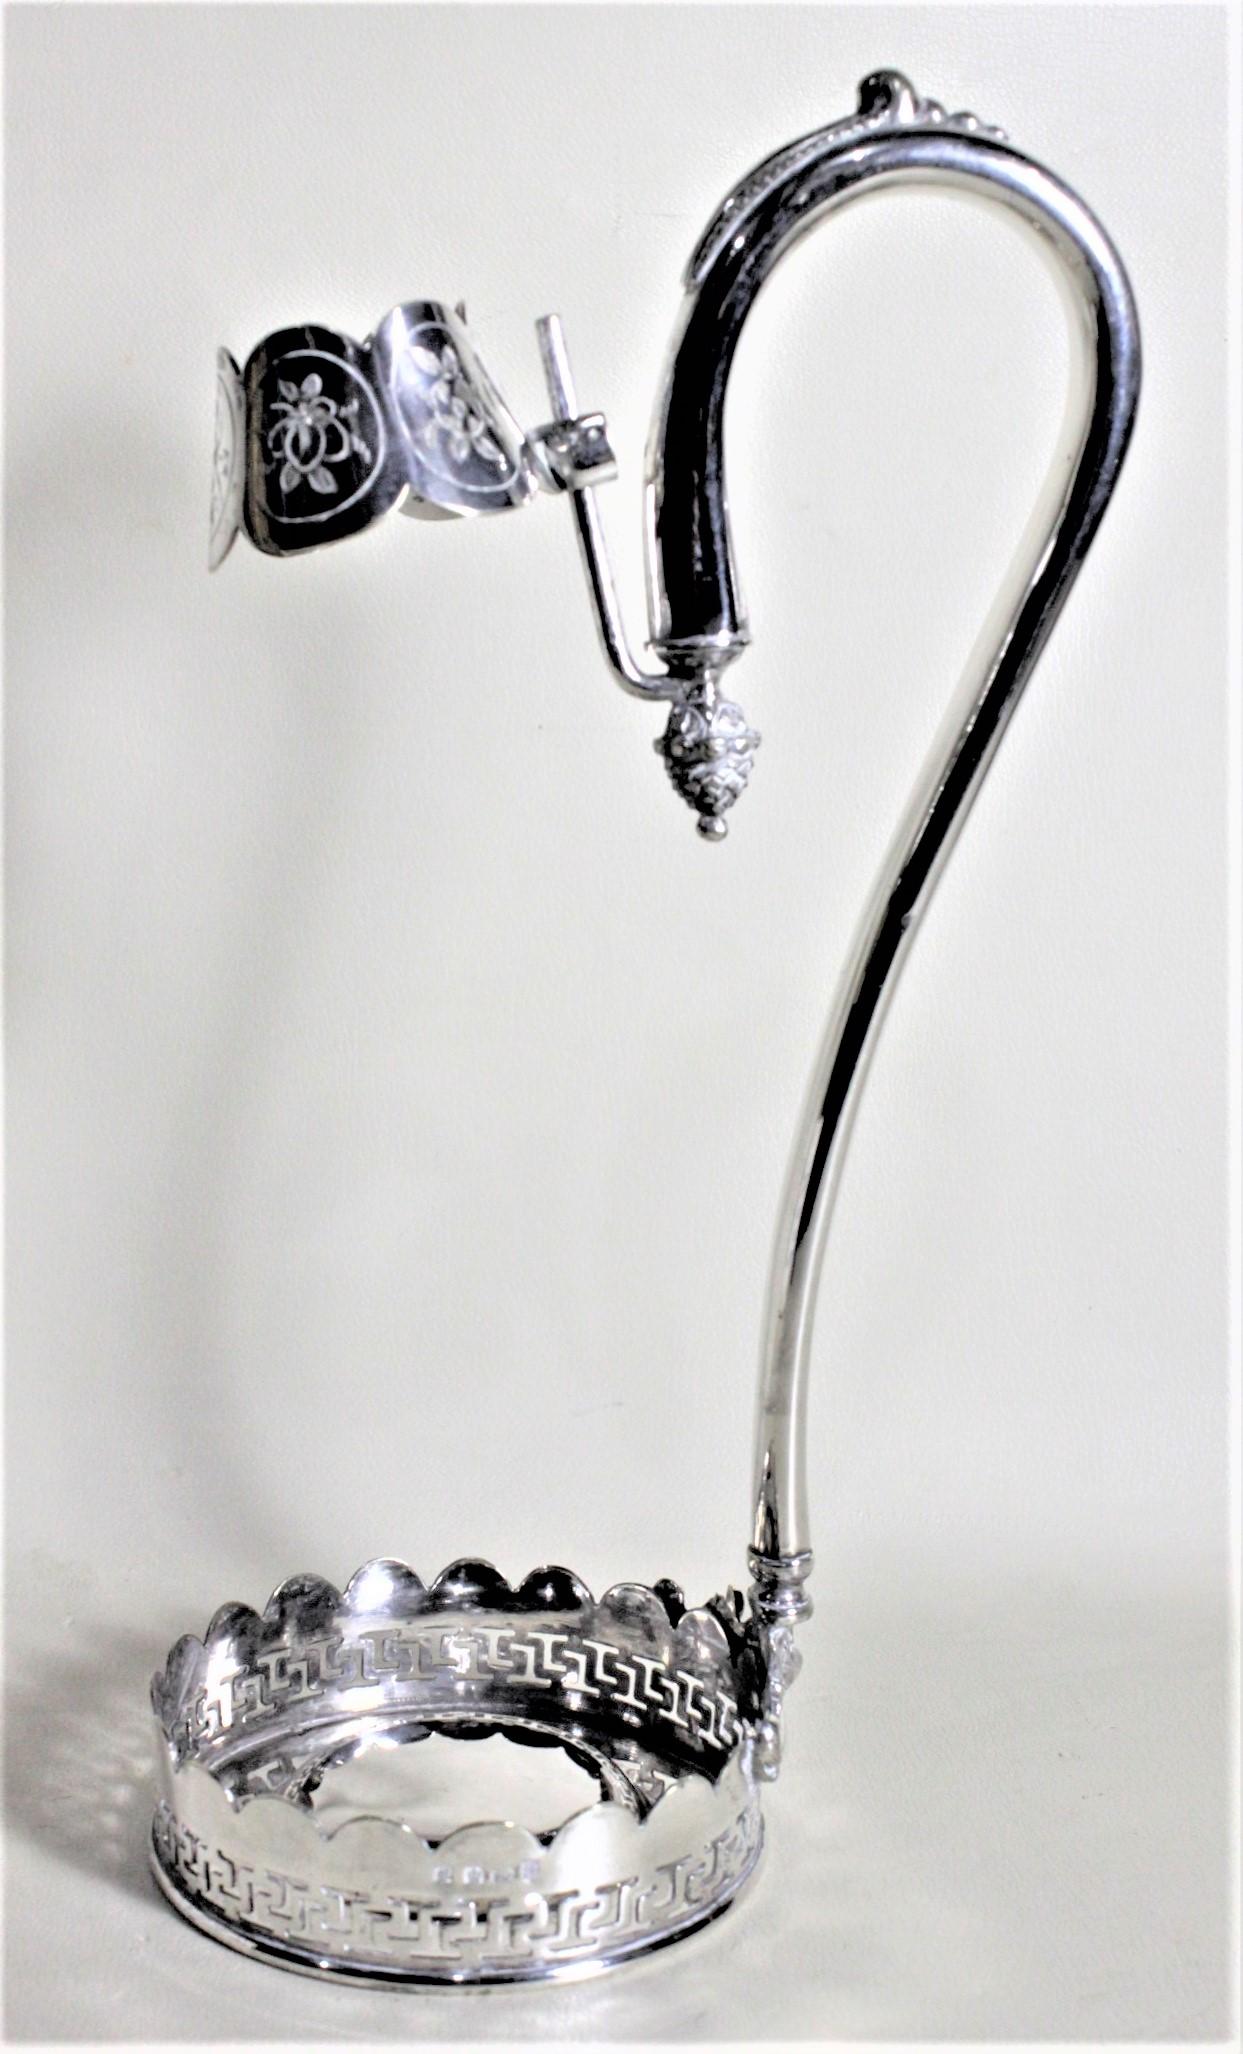 20th Century Antique Edwardian Silver Plated Wine Bottle Holder or Pourer with Acorn Finial For Sale